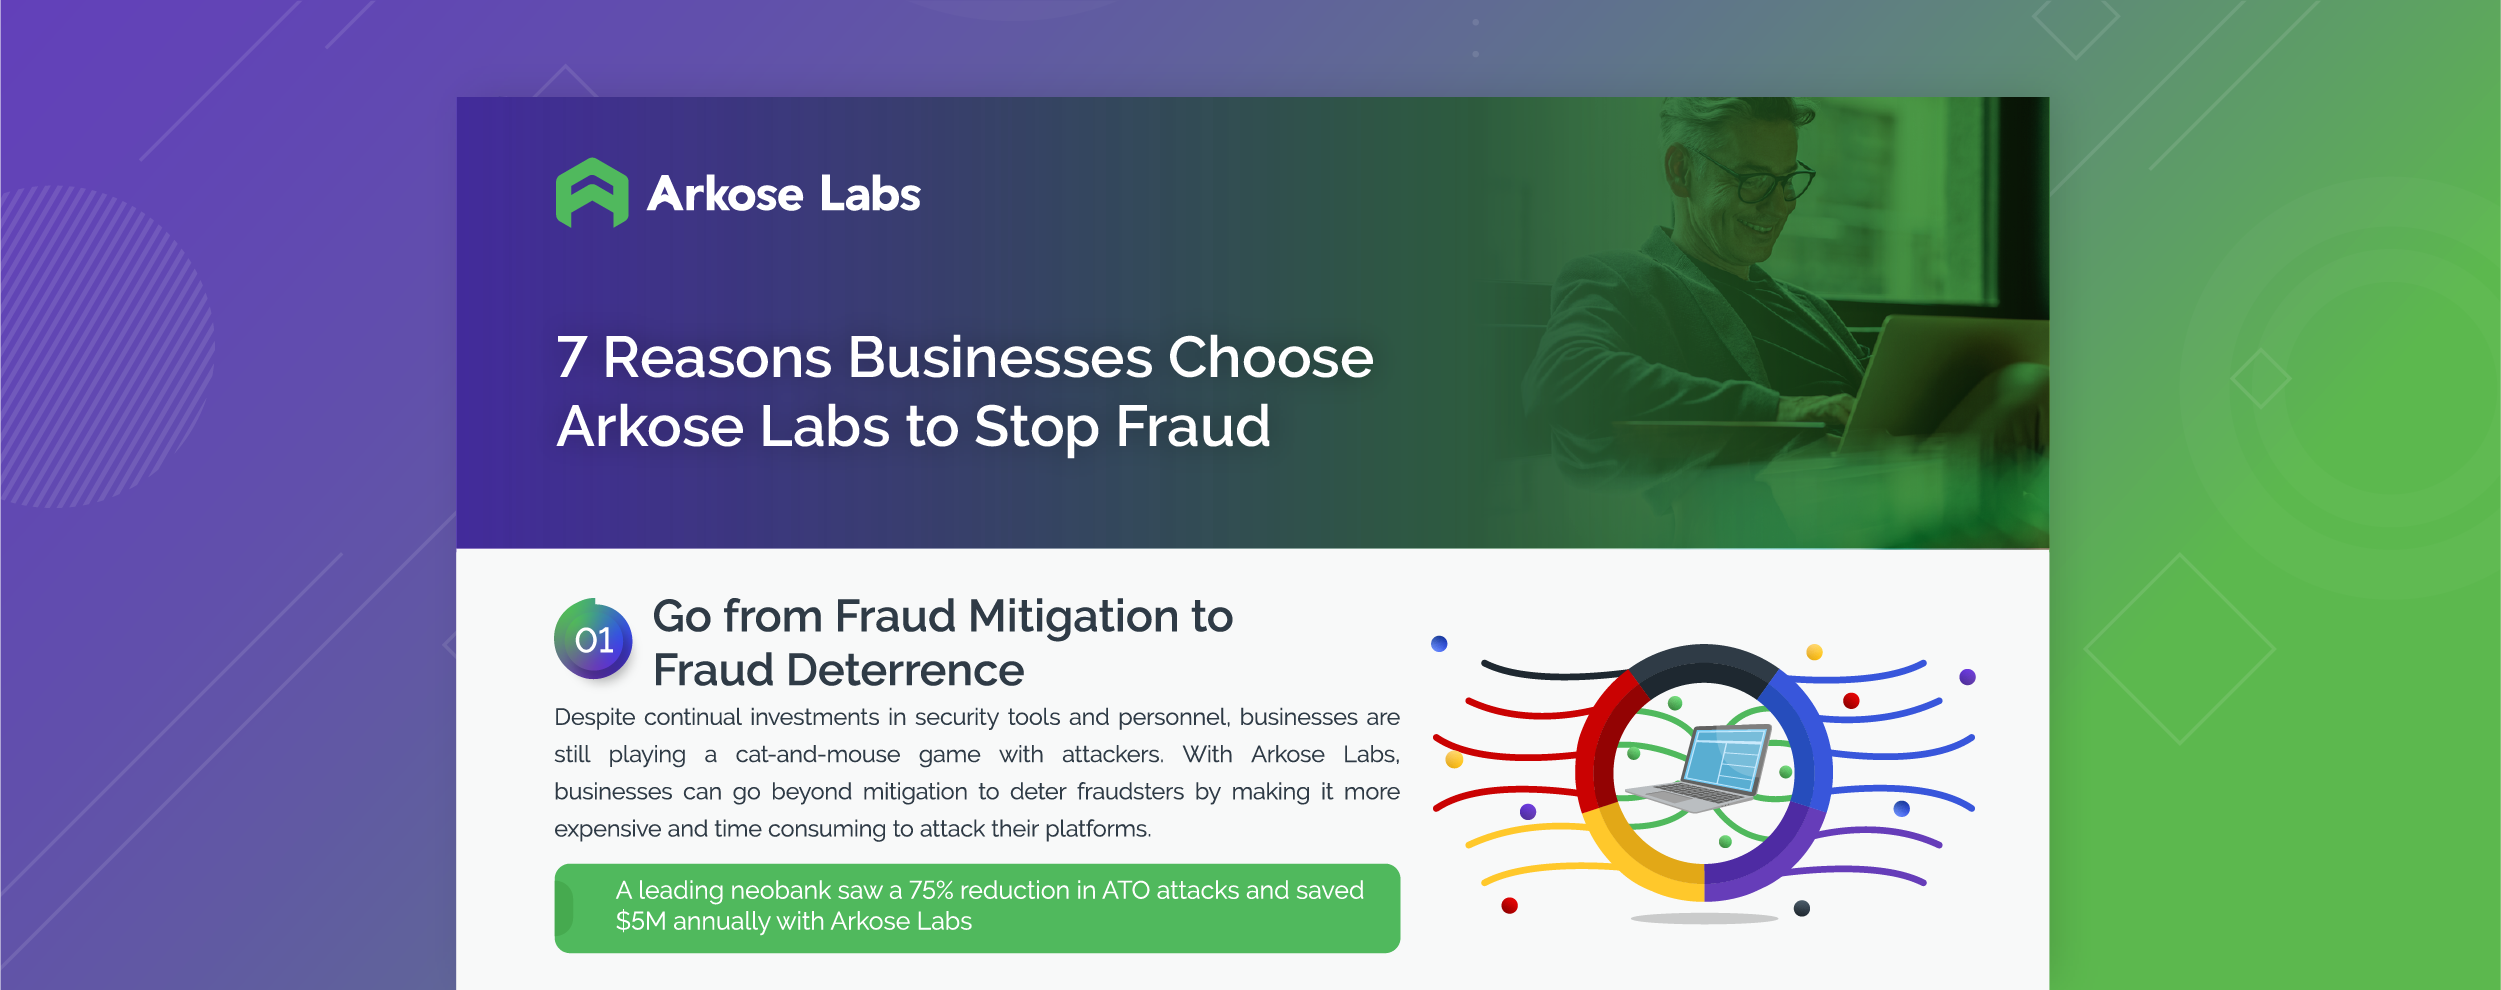 7 Reasons Businesses Choose Arkose Labs to Stop Fraud